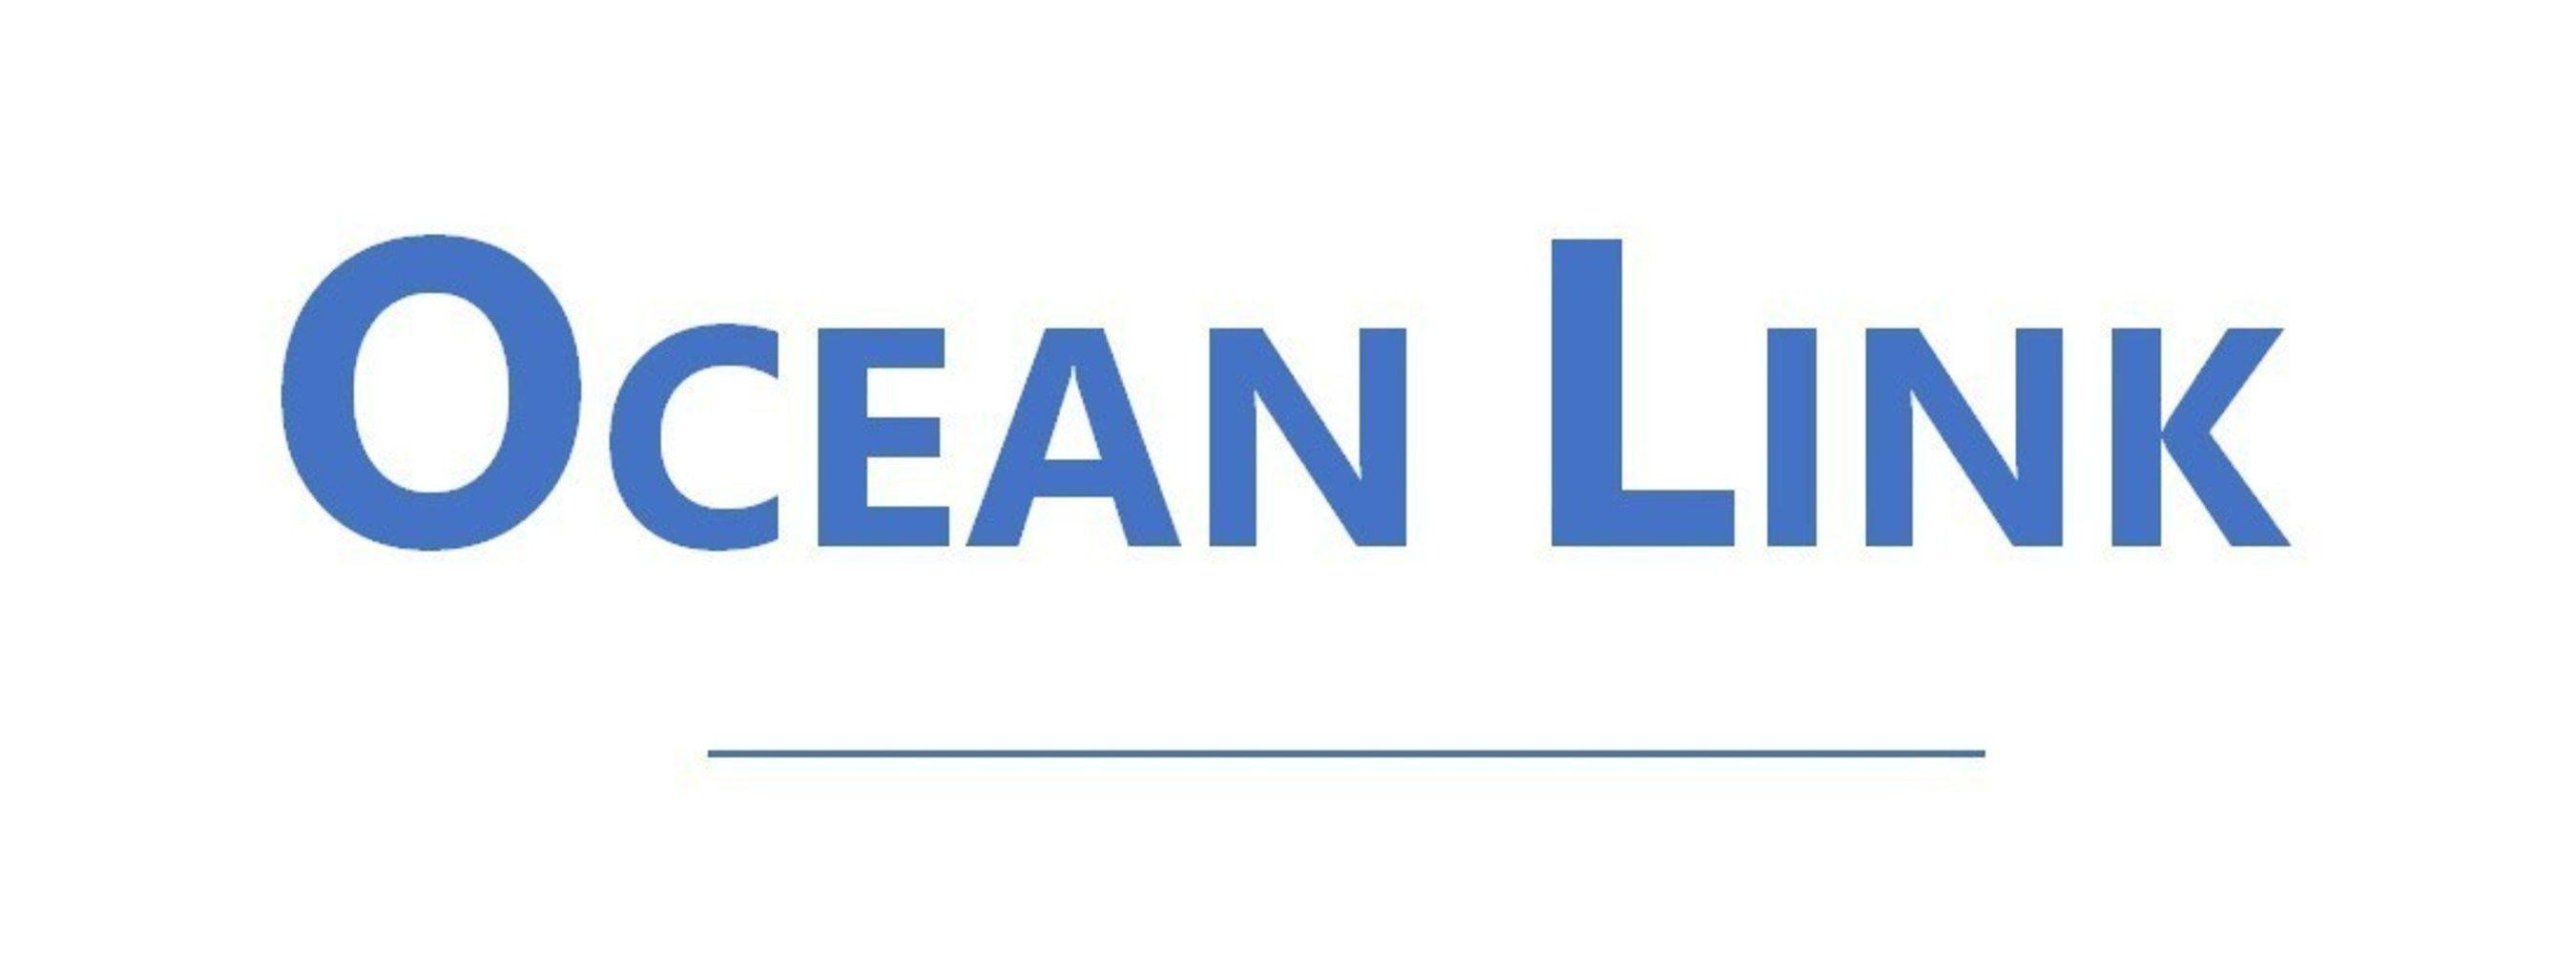 Ctrip Logo - Ocean Link, the First Private Equity Firm Focused on China's Travel ...